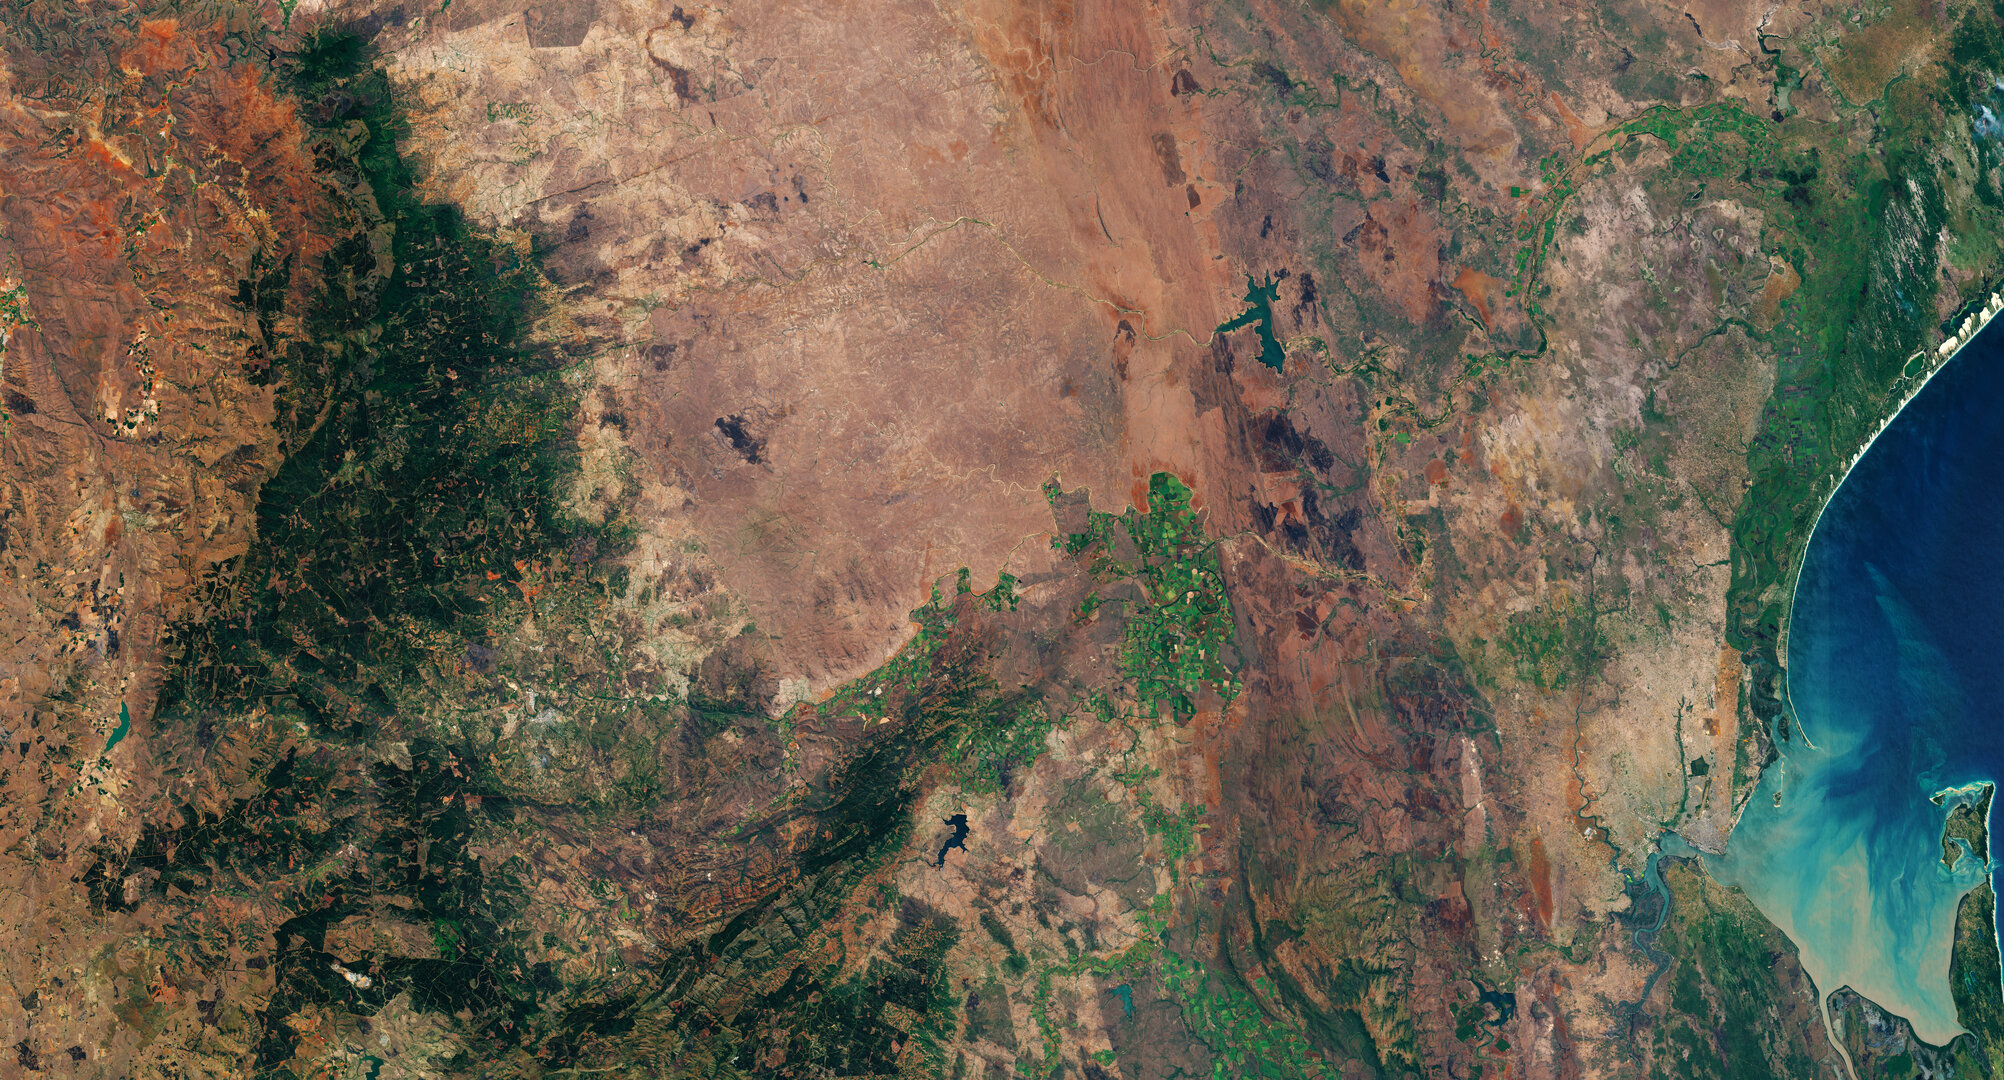 The Crocodile River traverses South Africa